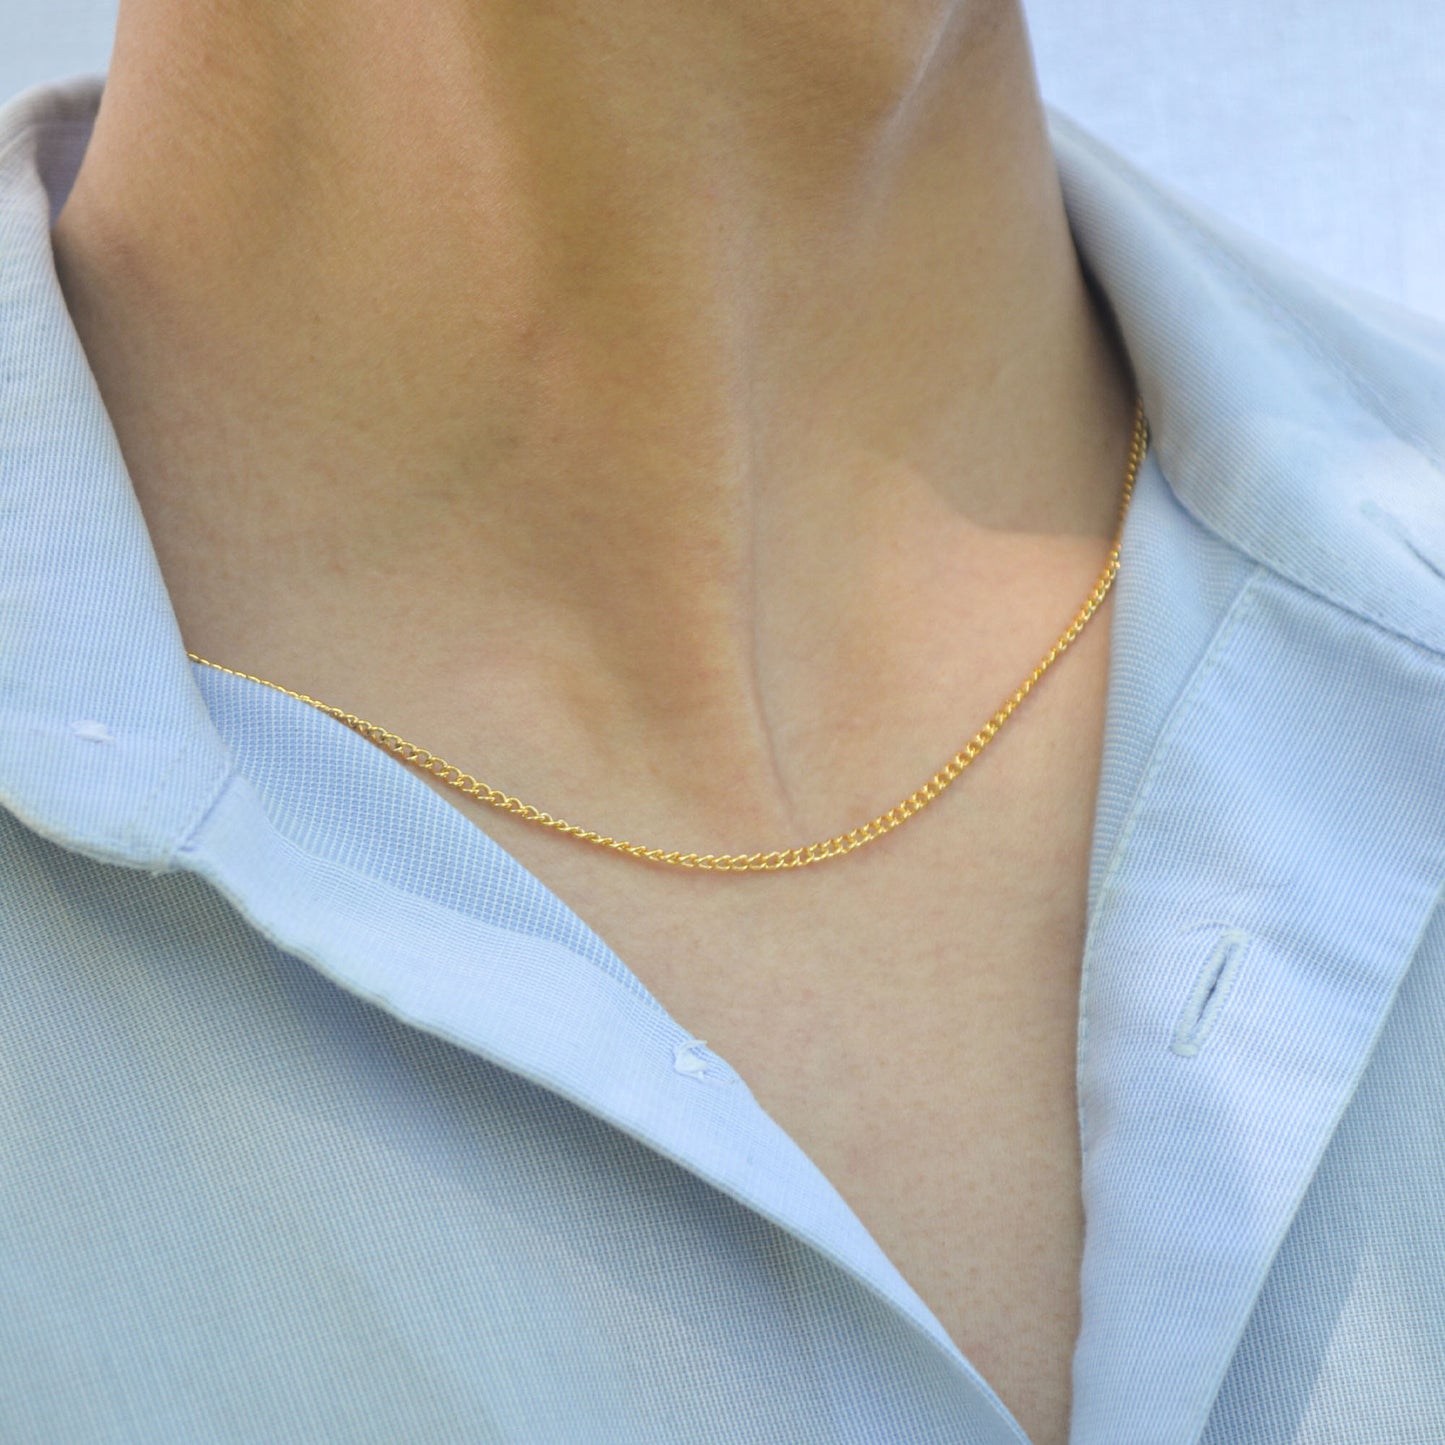 Large curb chain ketting gold filled voor mannen